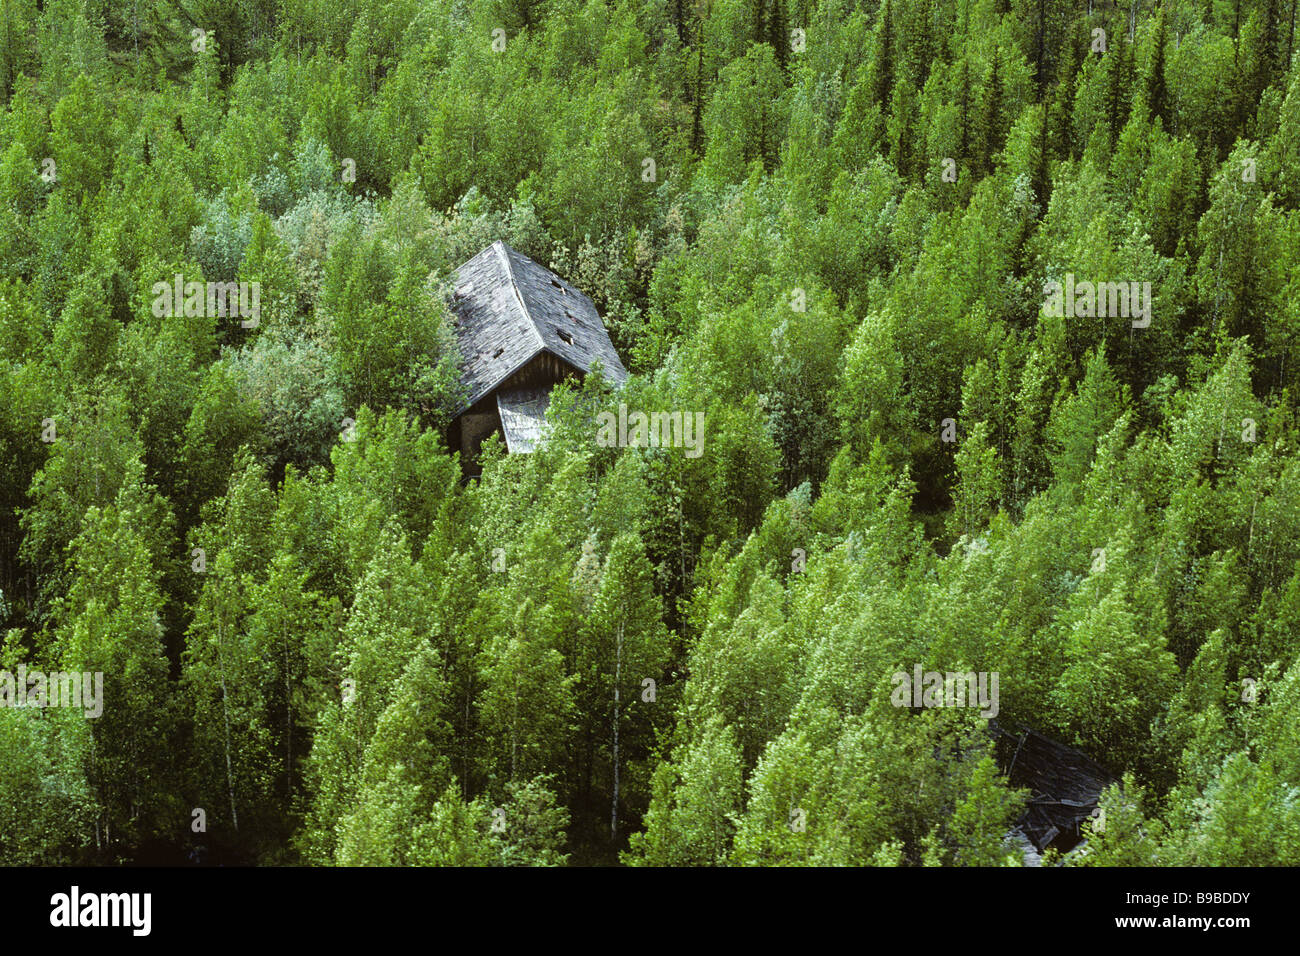 Aerial view of the deserted Stalin era gulag buildings from the Salekhard Igarka Railway in northern Siberia. Stock Photo